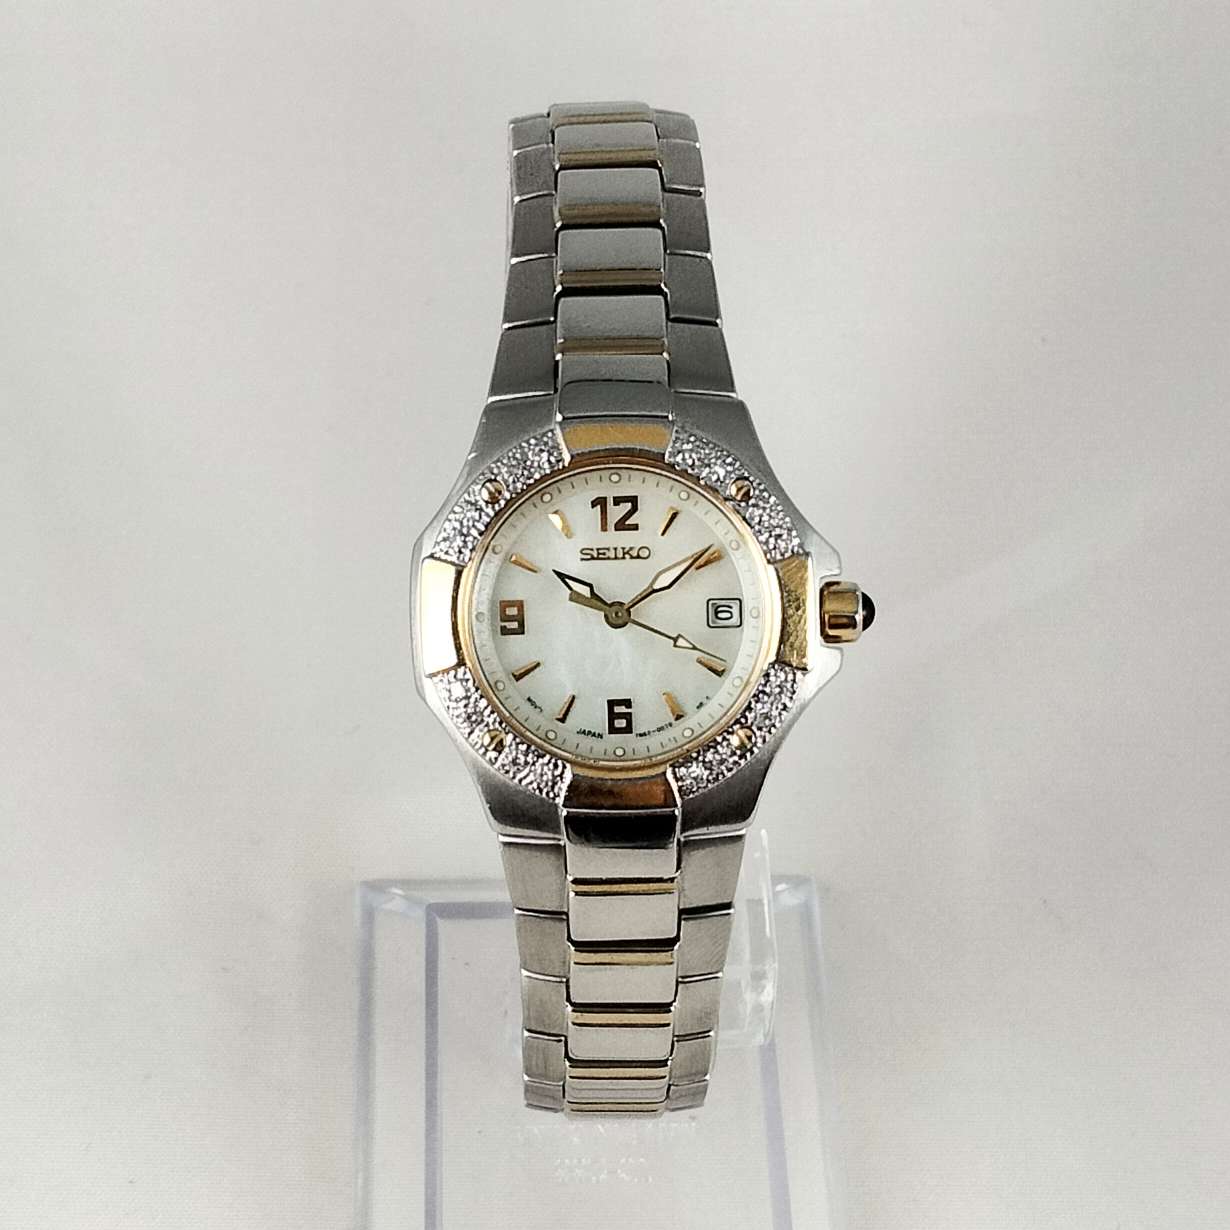 Seiko Watch, Mother of Pearl Dial, Jewel Details, Bracelet Strap